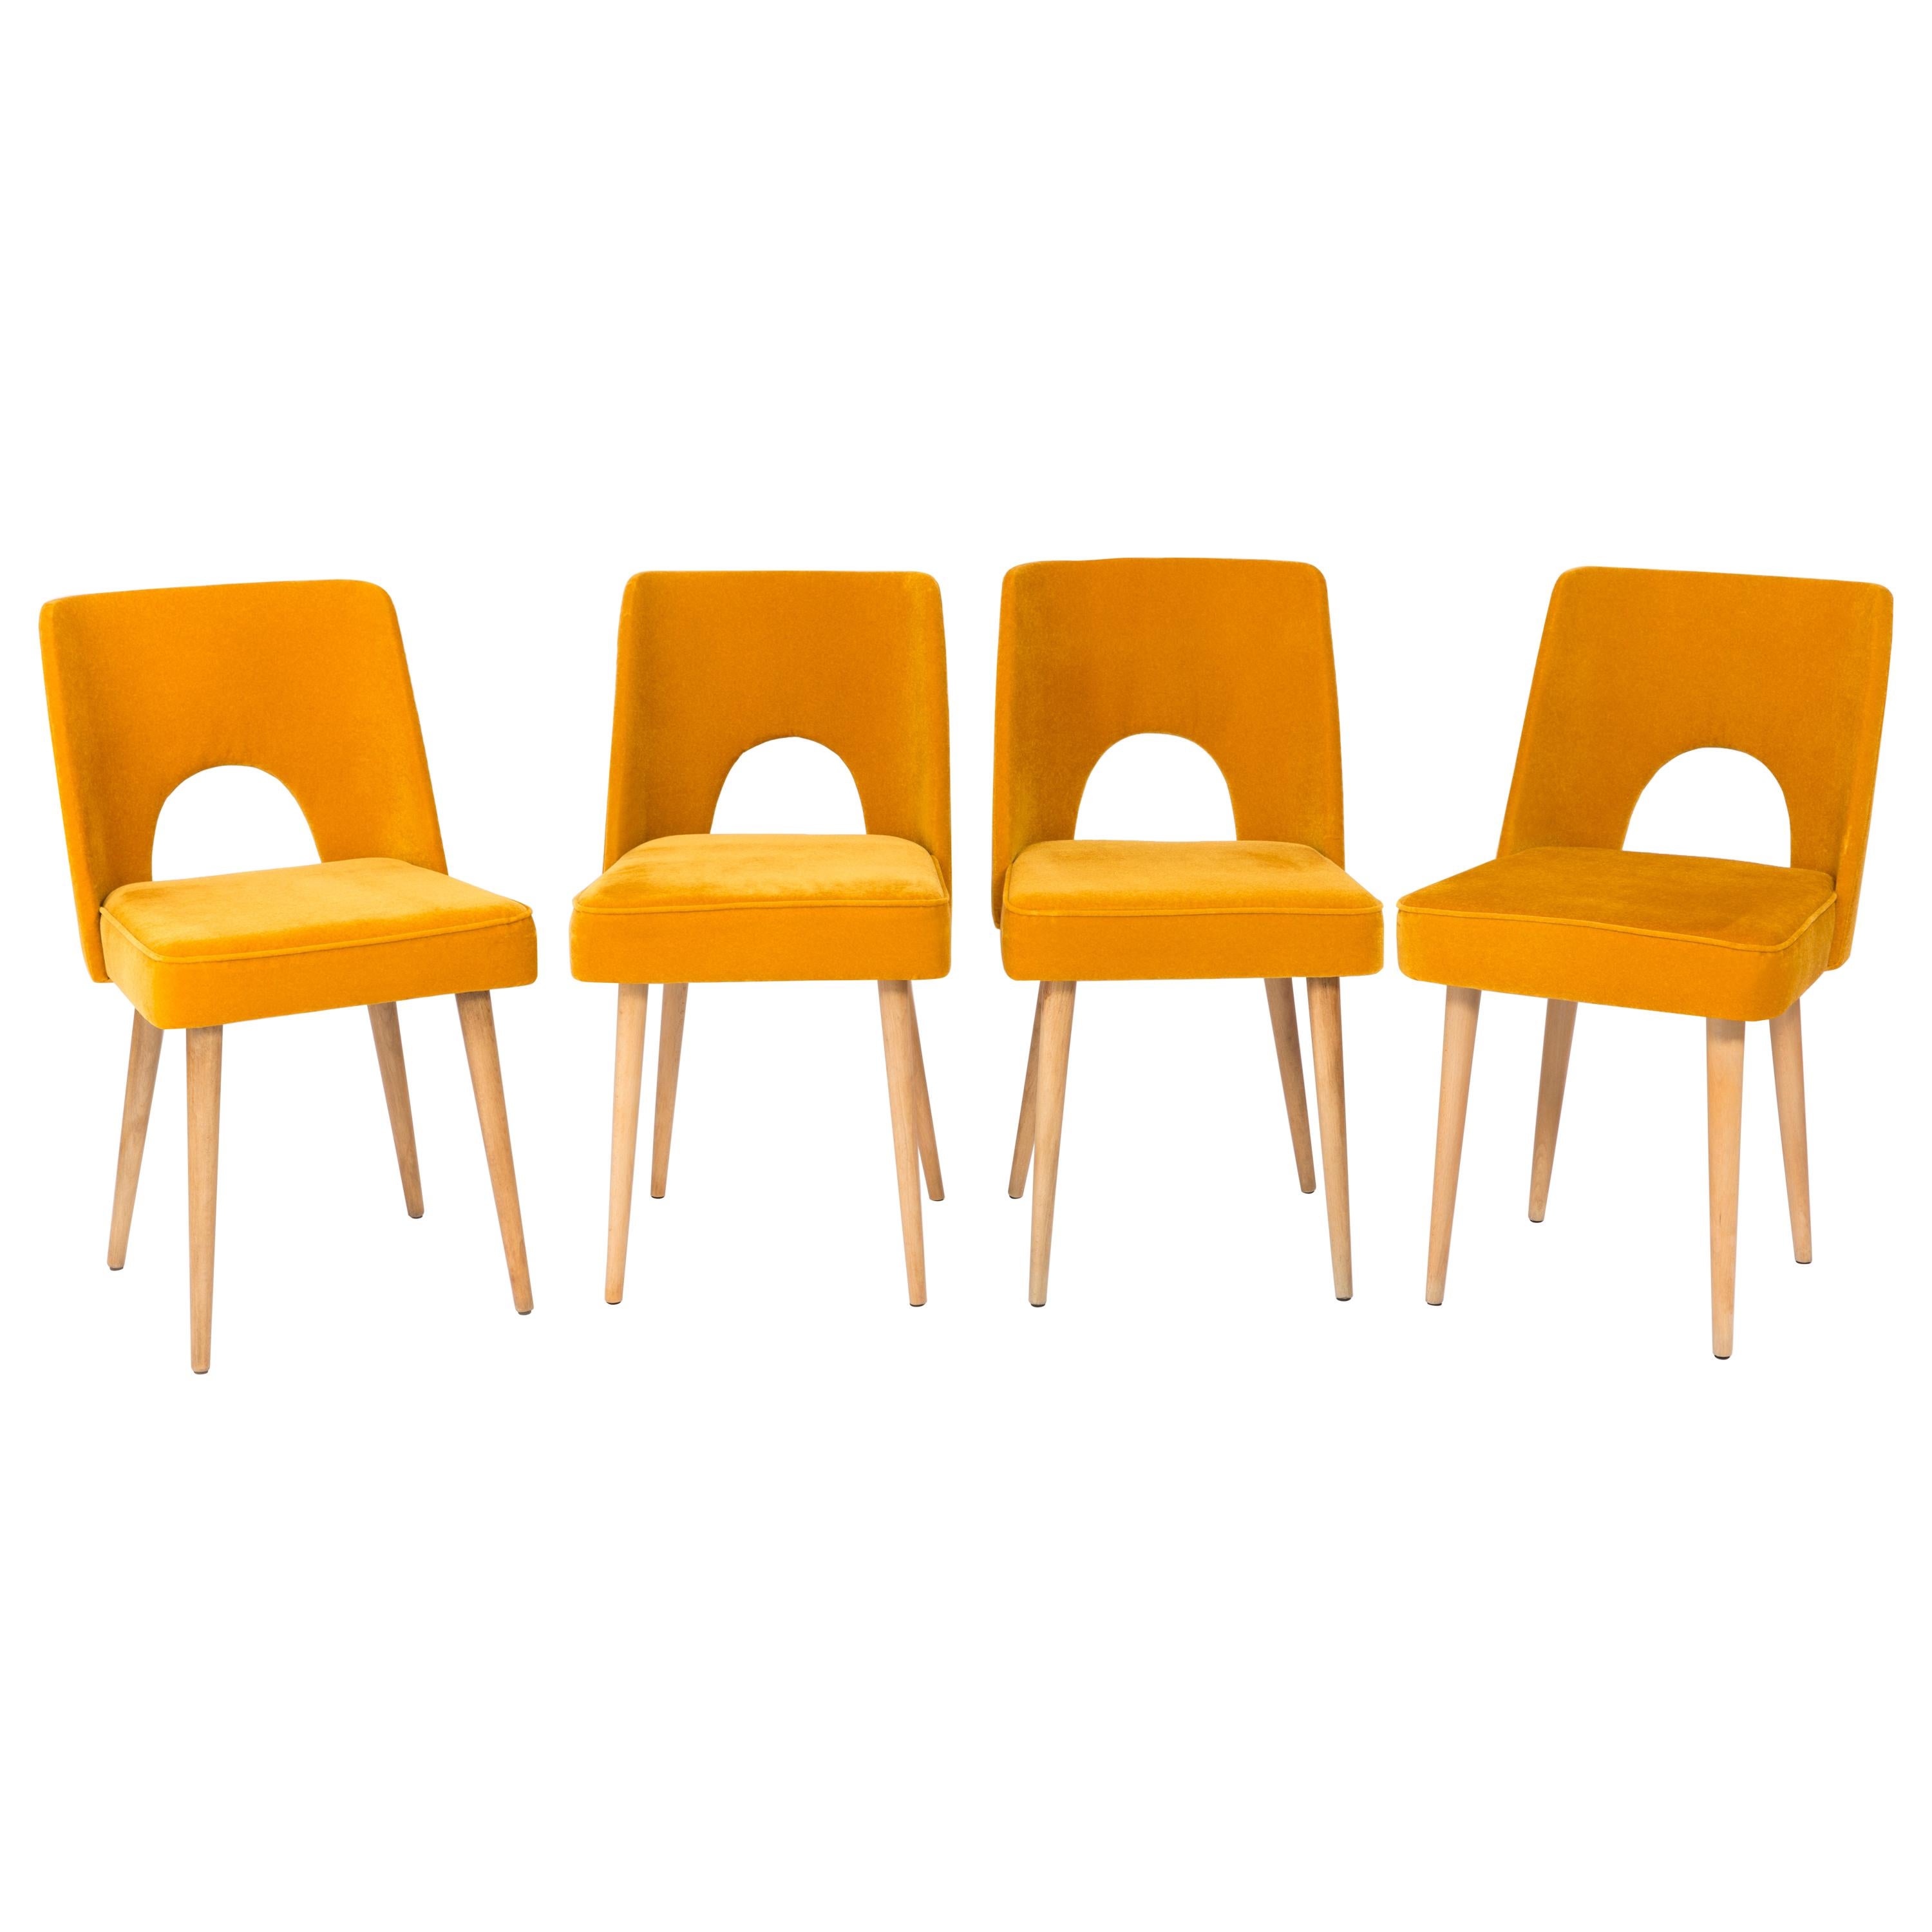 Set of Four Mustard Yellow Velvet 'Shell' Chairs, 1960s For Sale